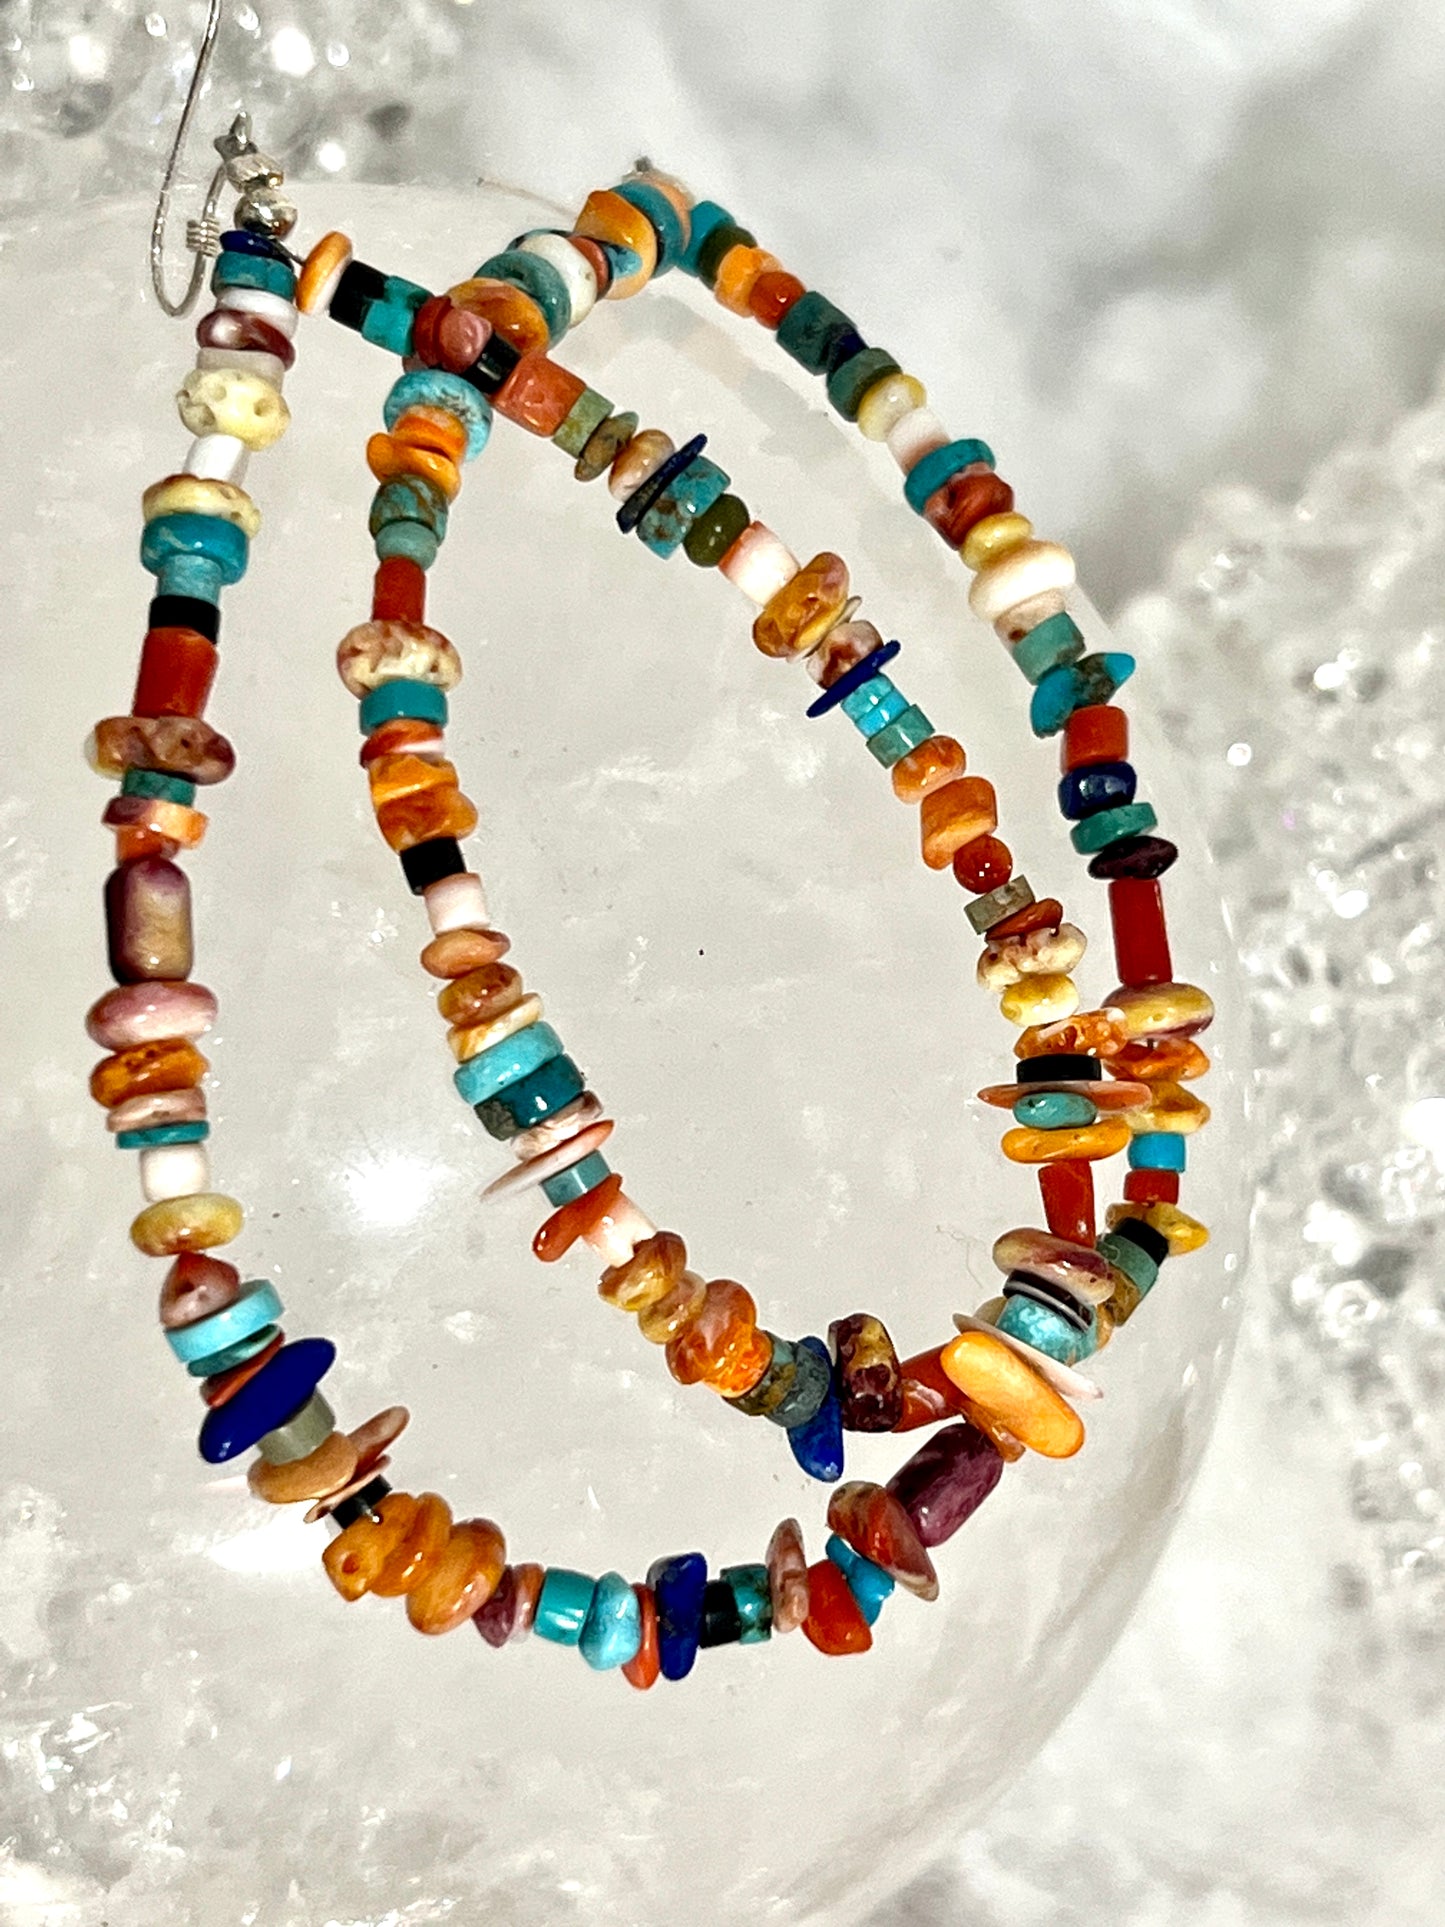 A pair of Brilliant Southwest Beaded Earrings from Super Silver, in southwest sunset colors, adorned with colorful beads, showcased on top of ice.